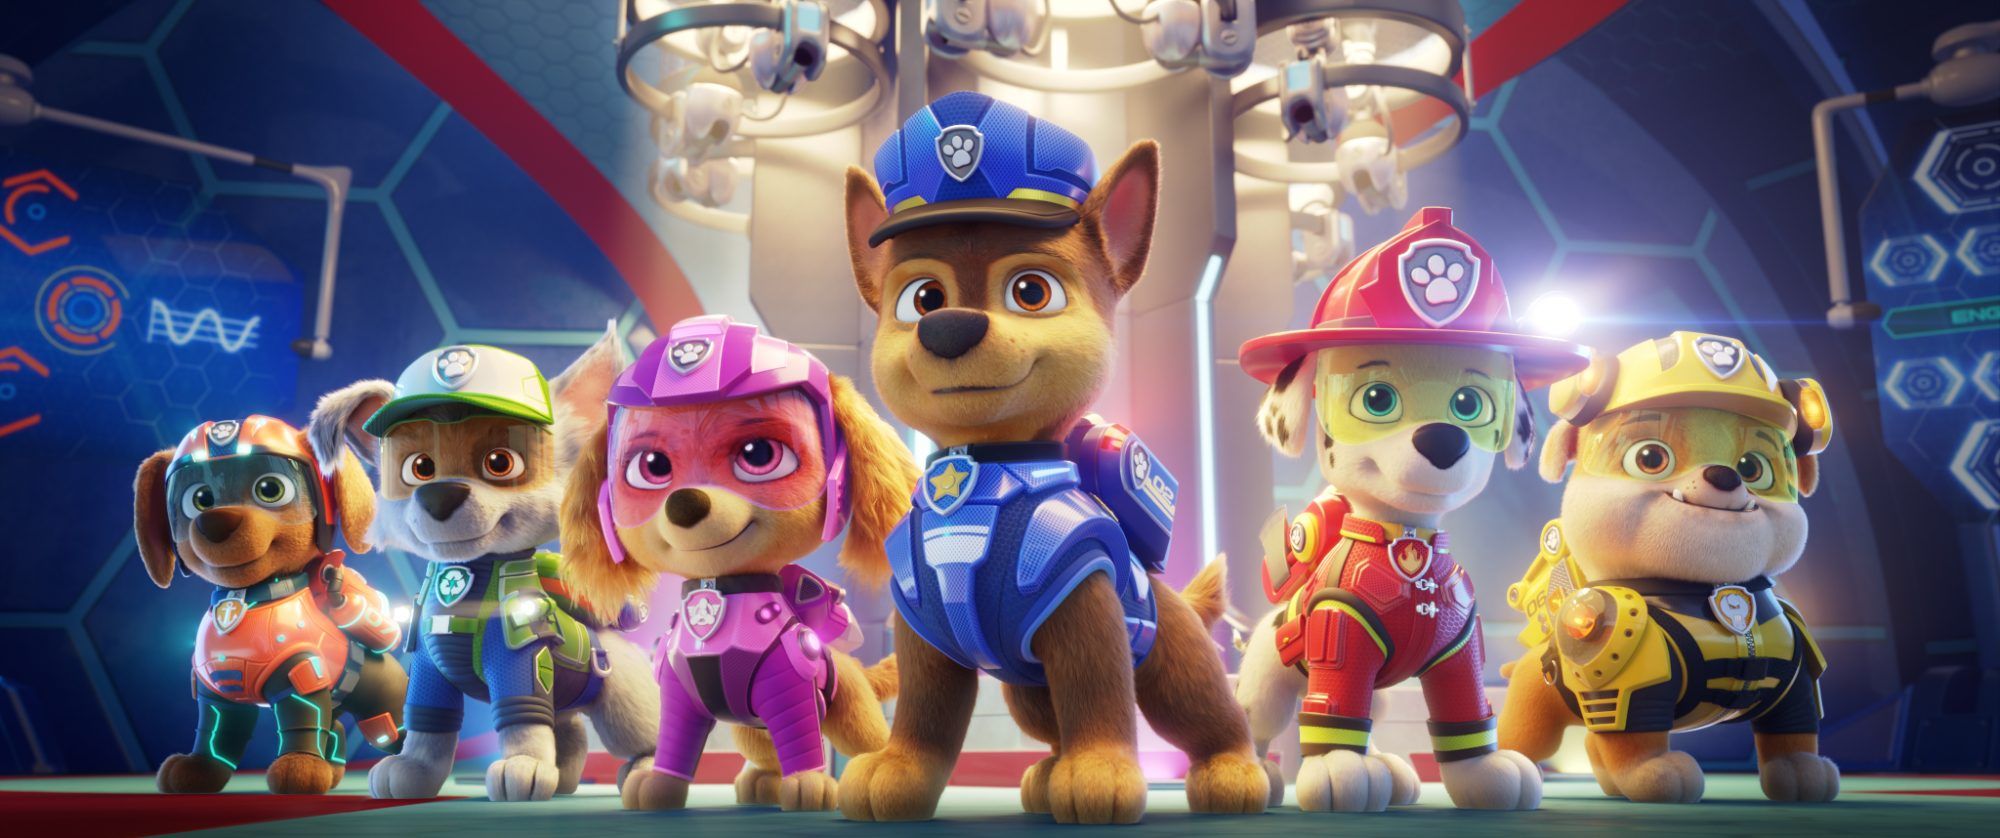 Paw Patrol: The Movie First Image Show New Pup Voiced